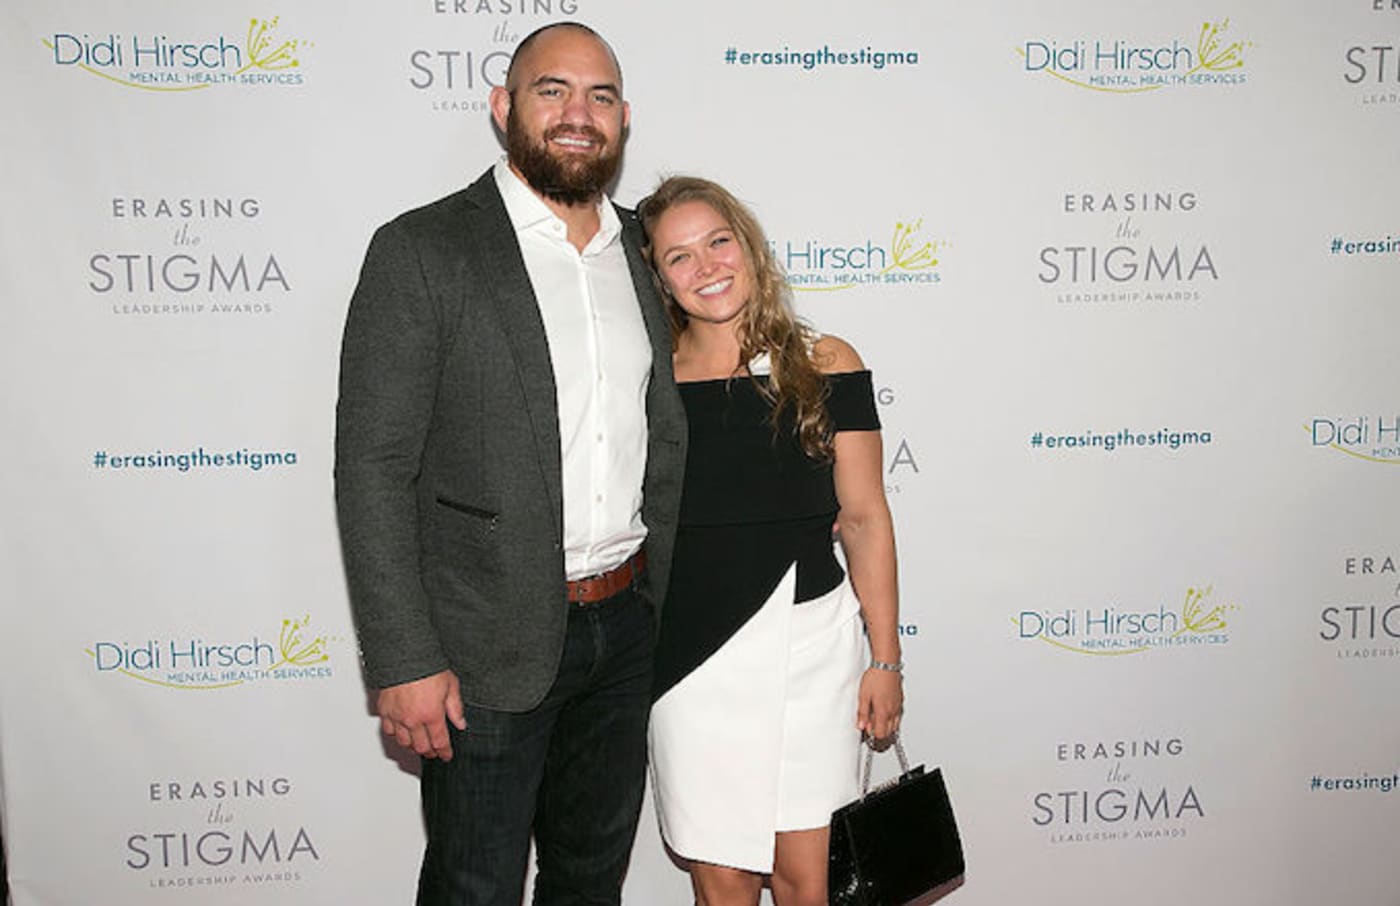 Browne and Rousey